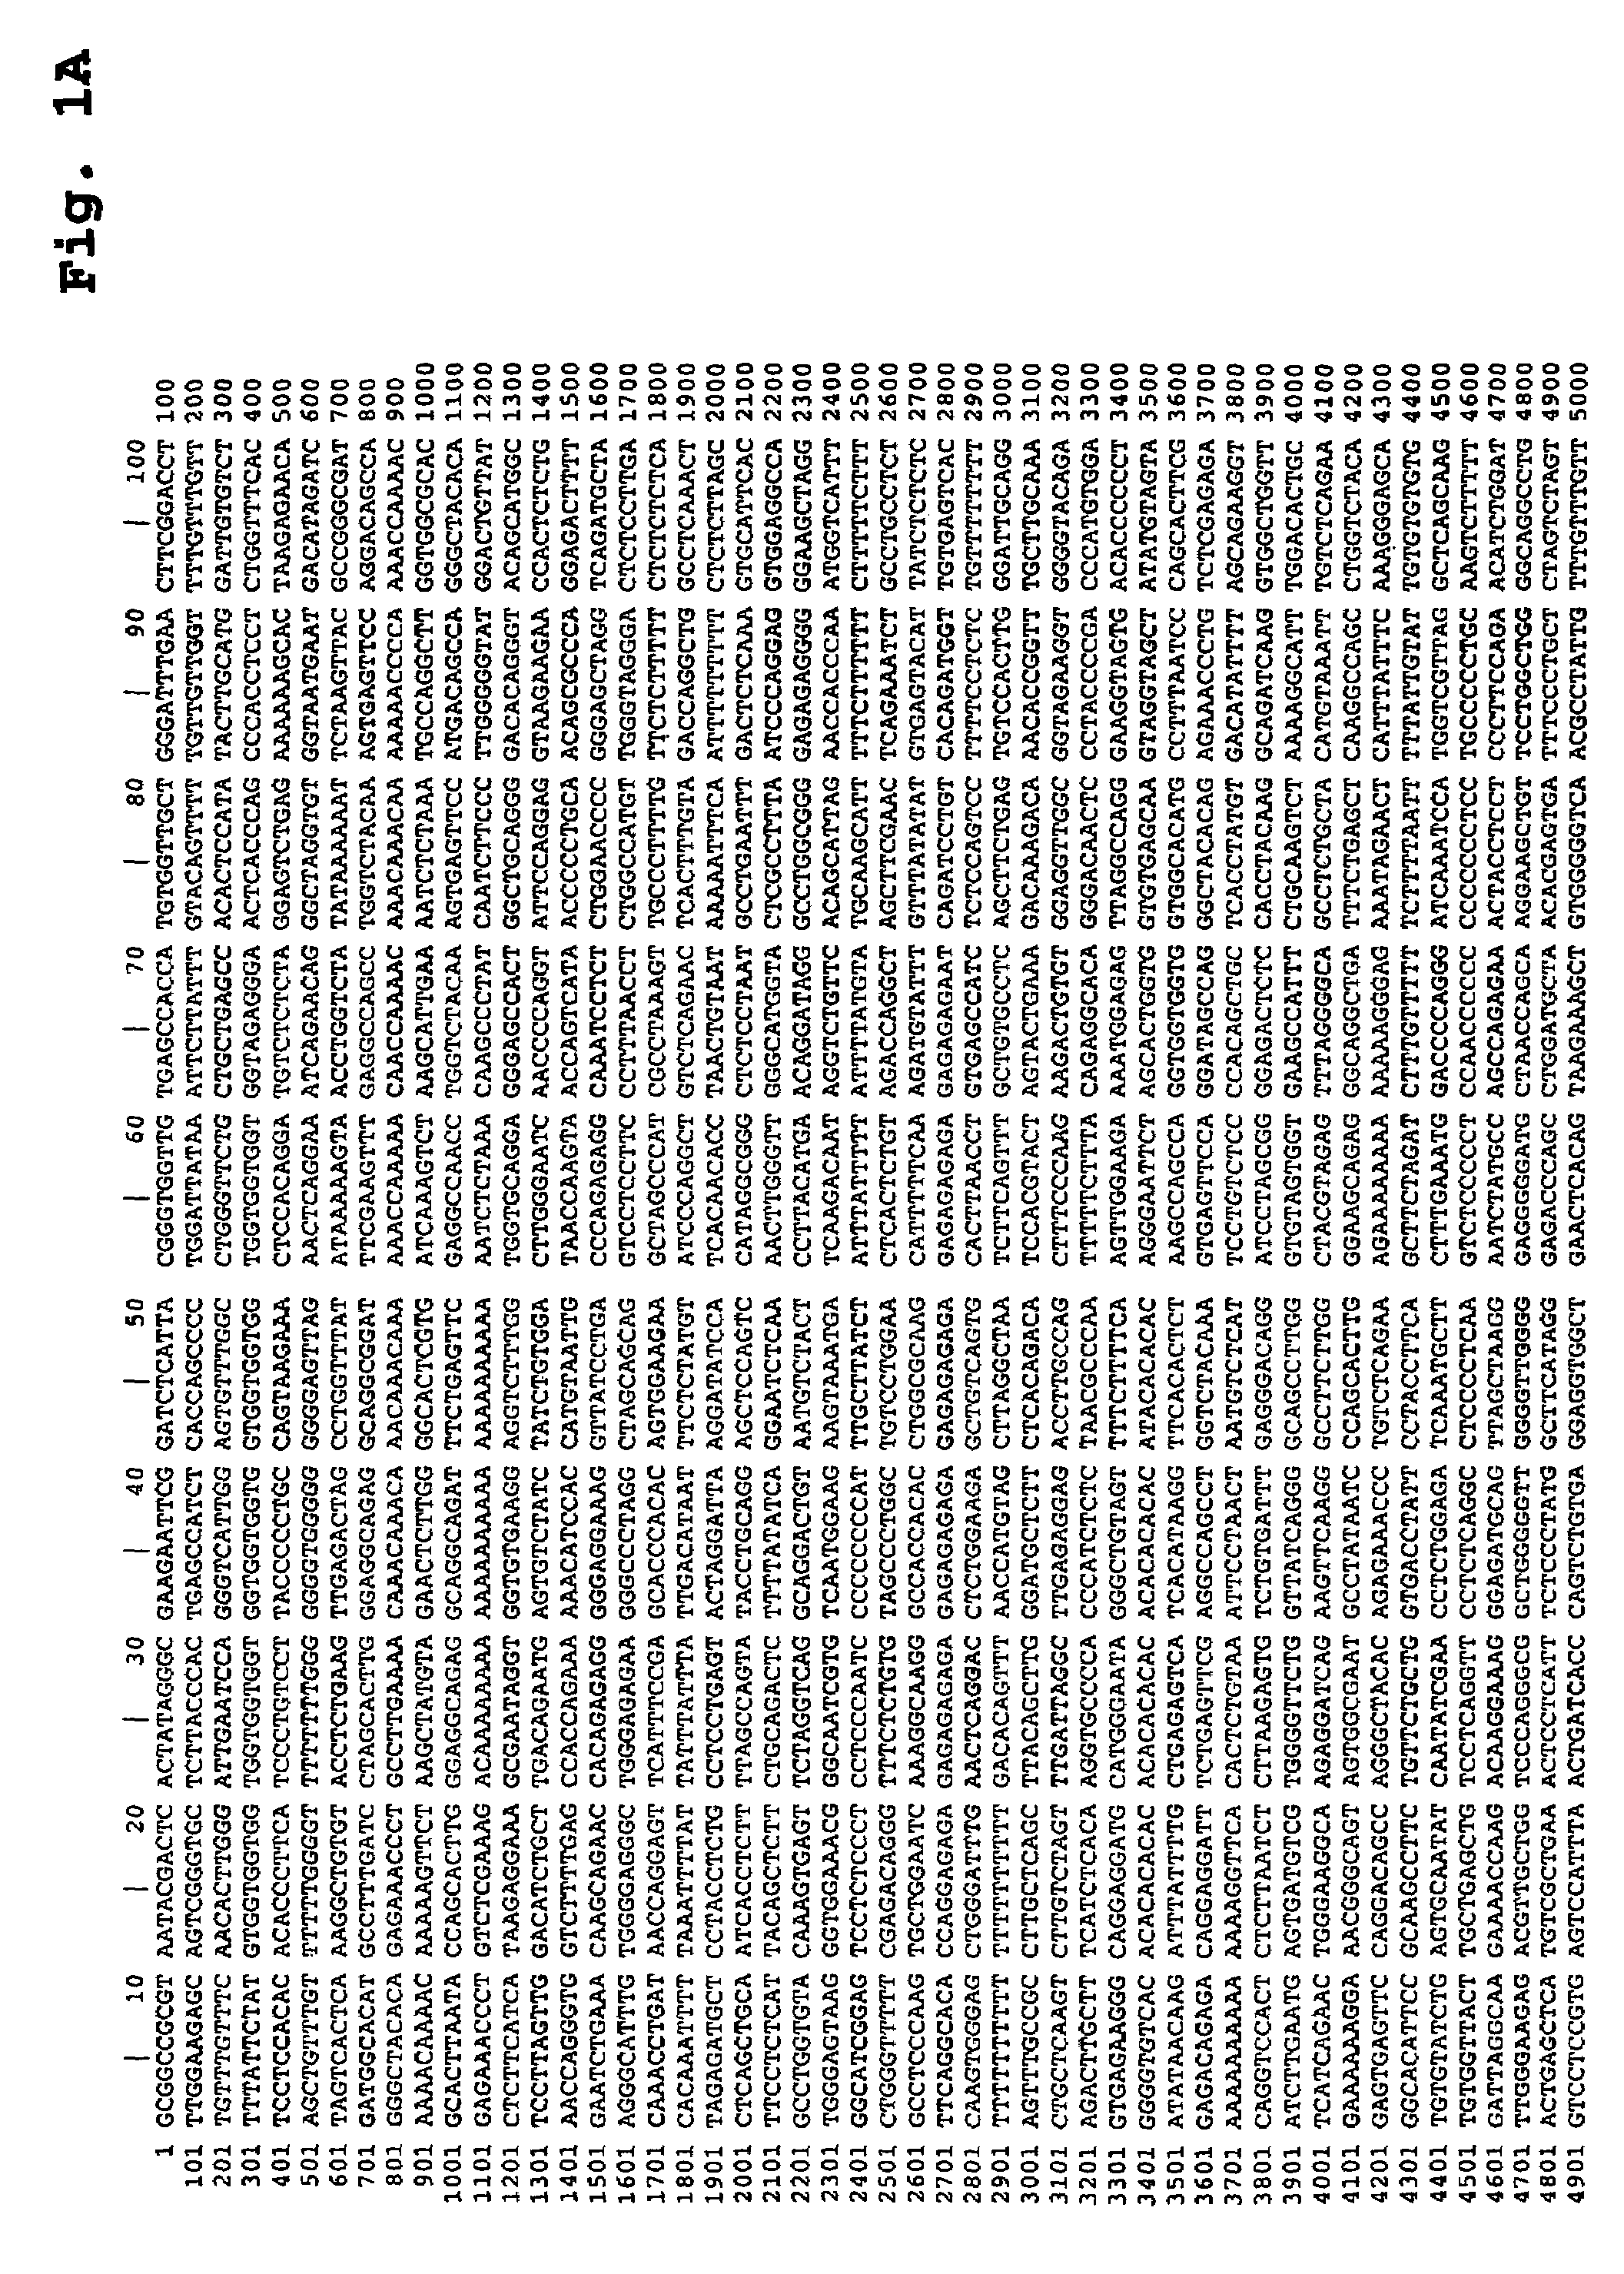 Compositions for the derivation of germ cells from stem cells and methods of use thereof